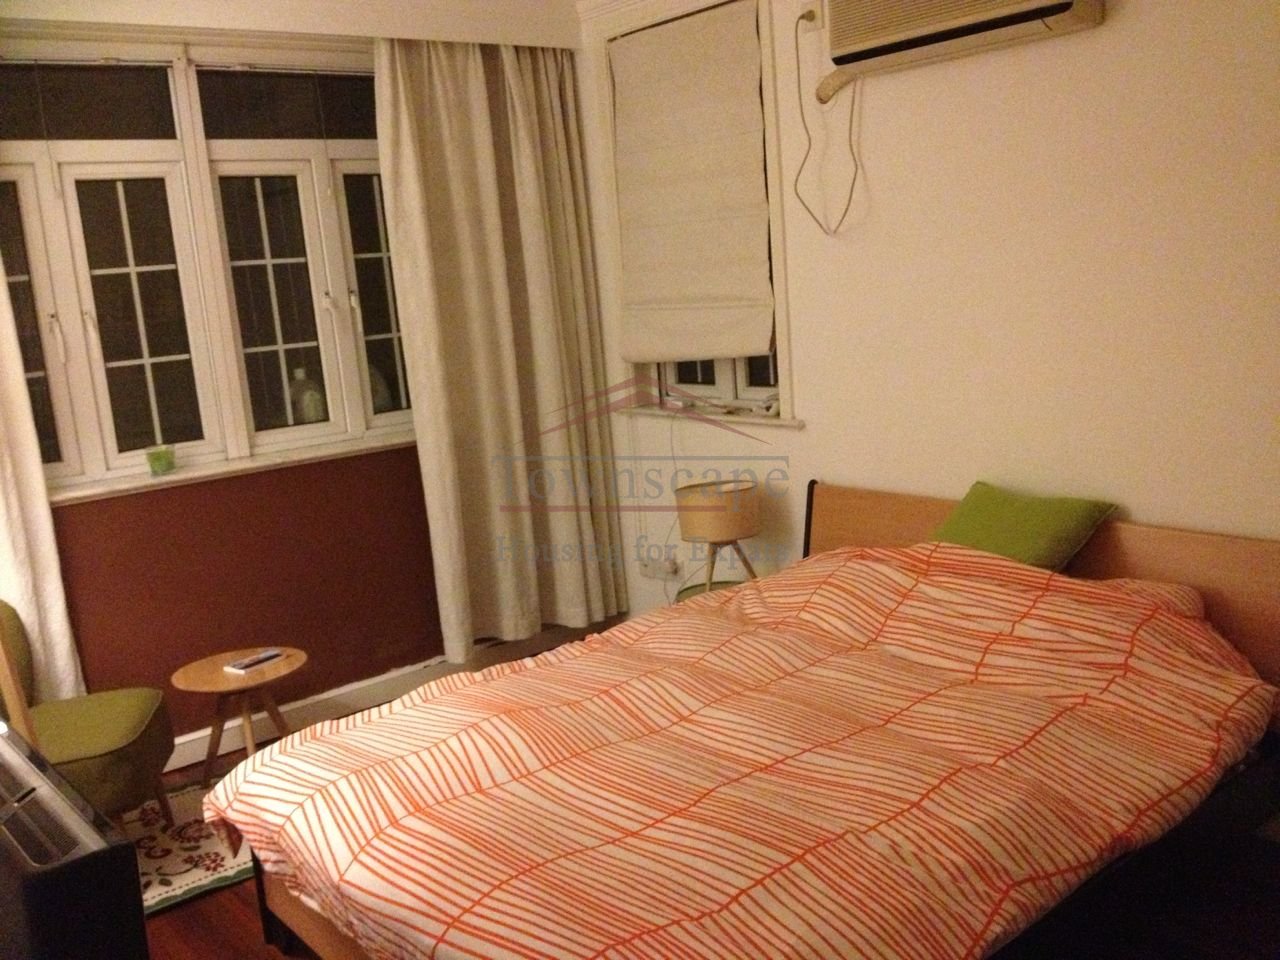 rent in Shanghai Well Priced 2 Bedroom Lane House w/garden French Concession L1